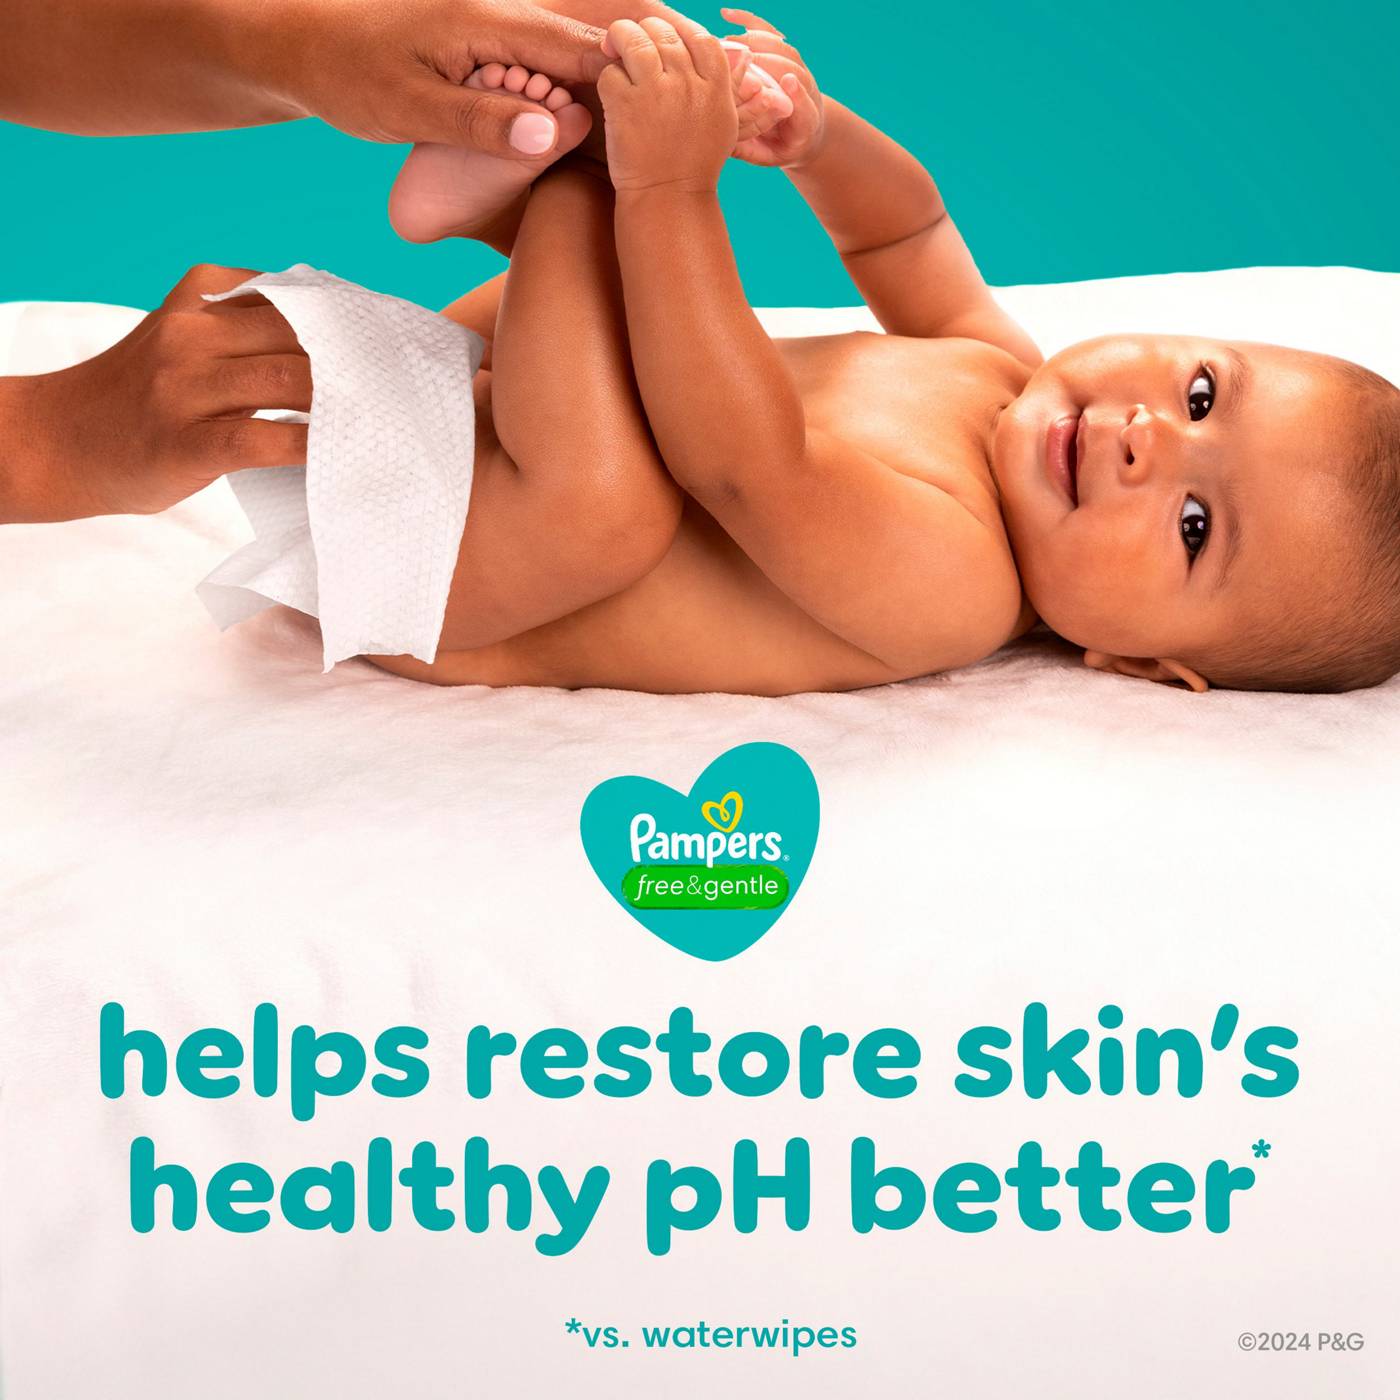 Pampers Free & Gentle Plant Based Baby Wipes; image 6 of 10